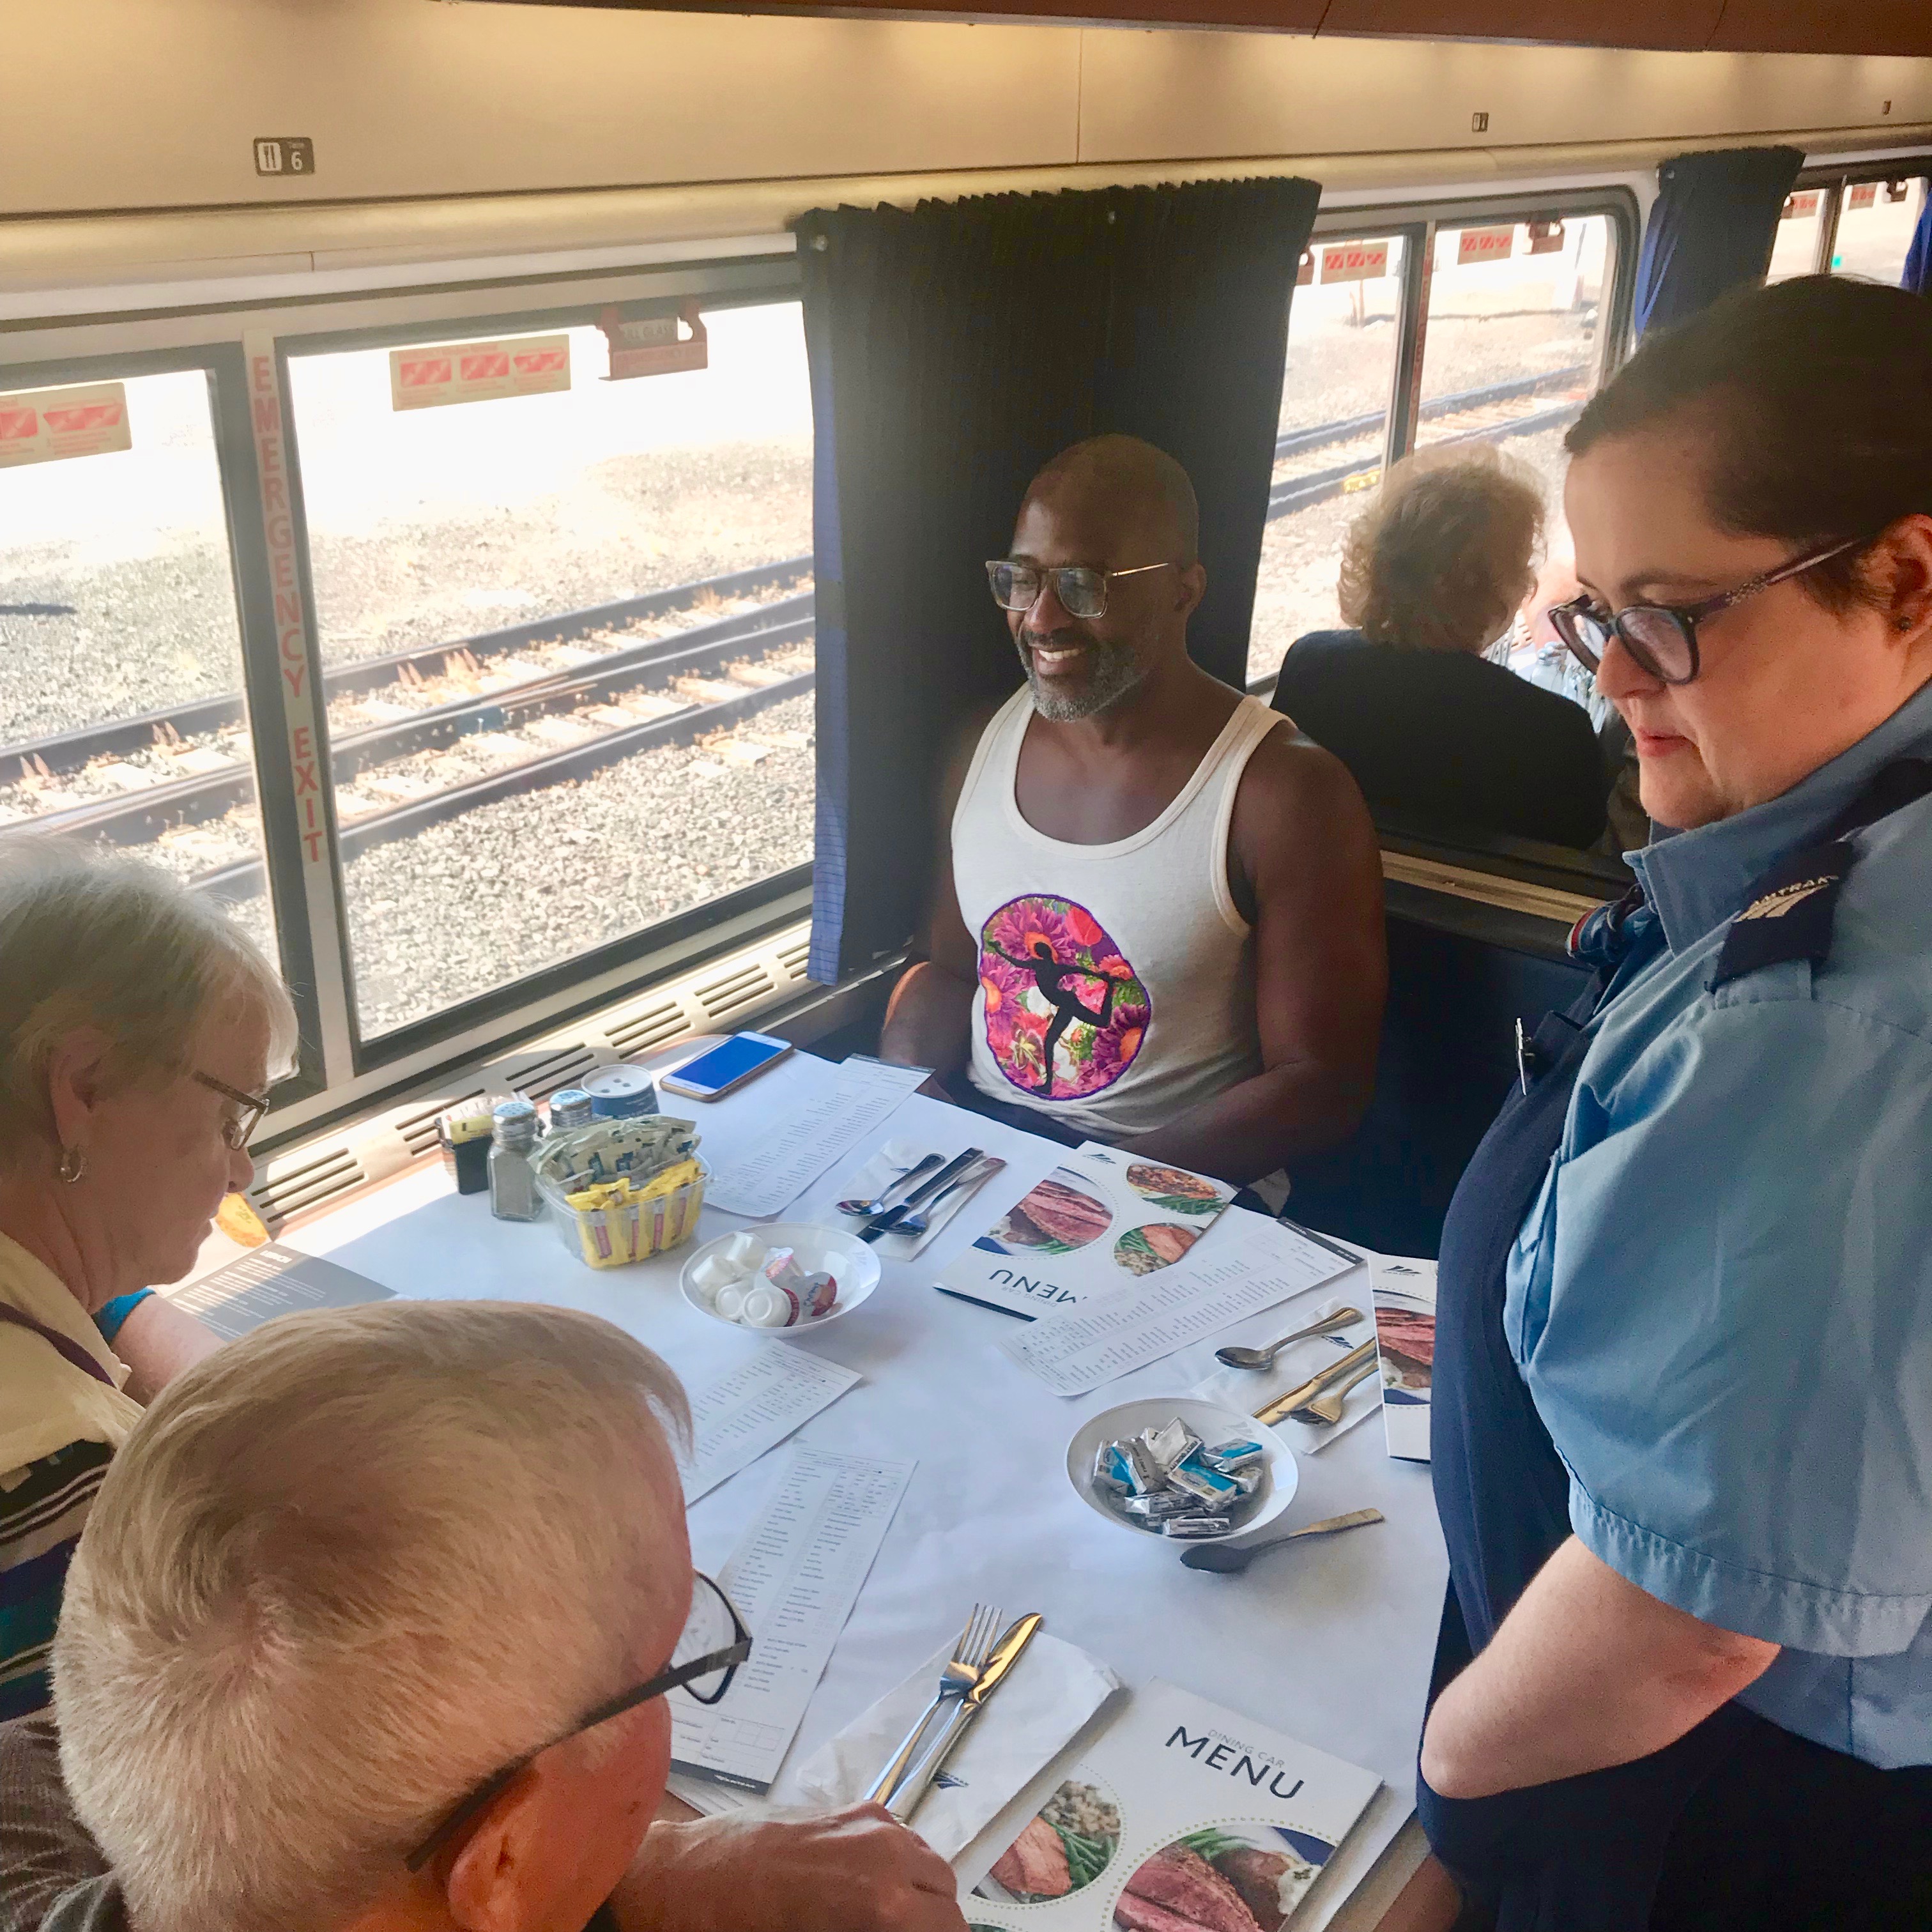 Amtrak Empire Builder Dining Car.  Long-Distance trains like this one between Seattle and Chicago have full meal service, and passengers are combined in the booths for 4 people. 